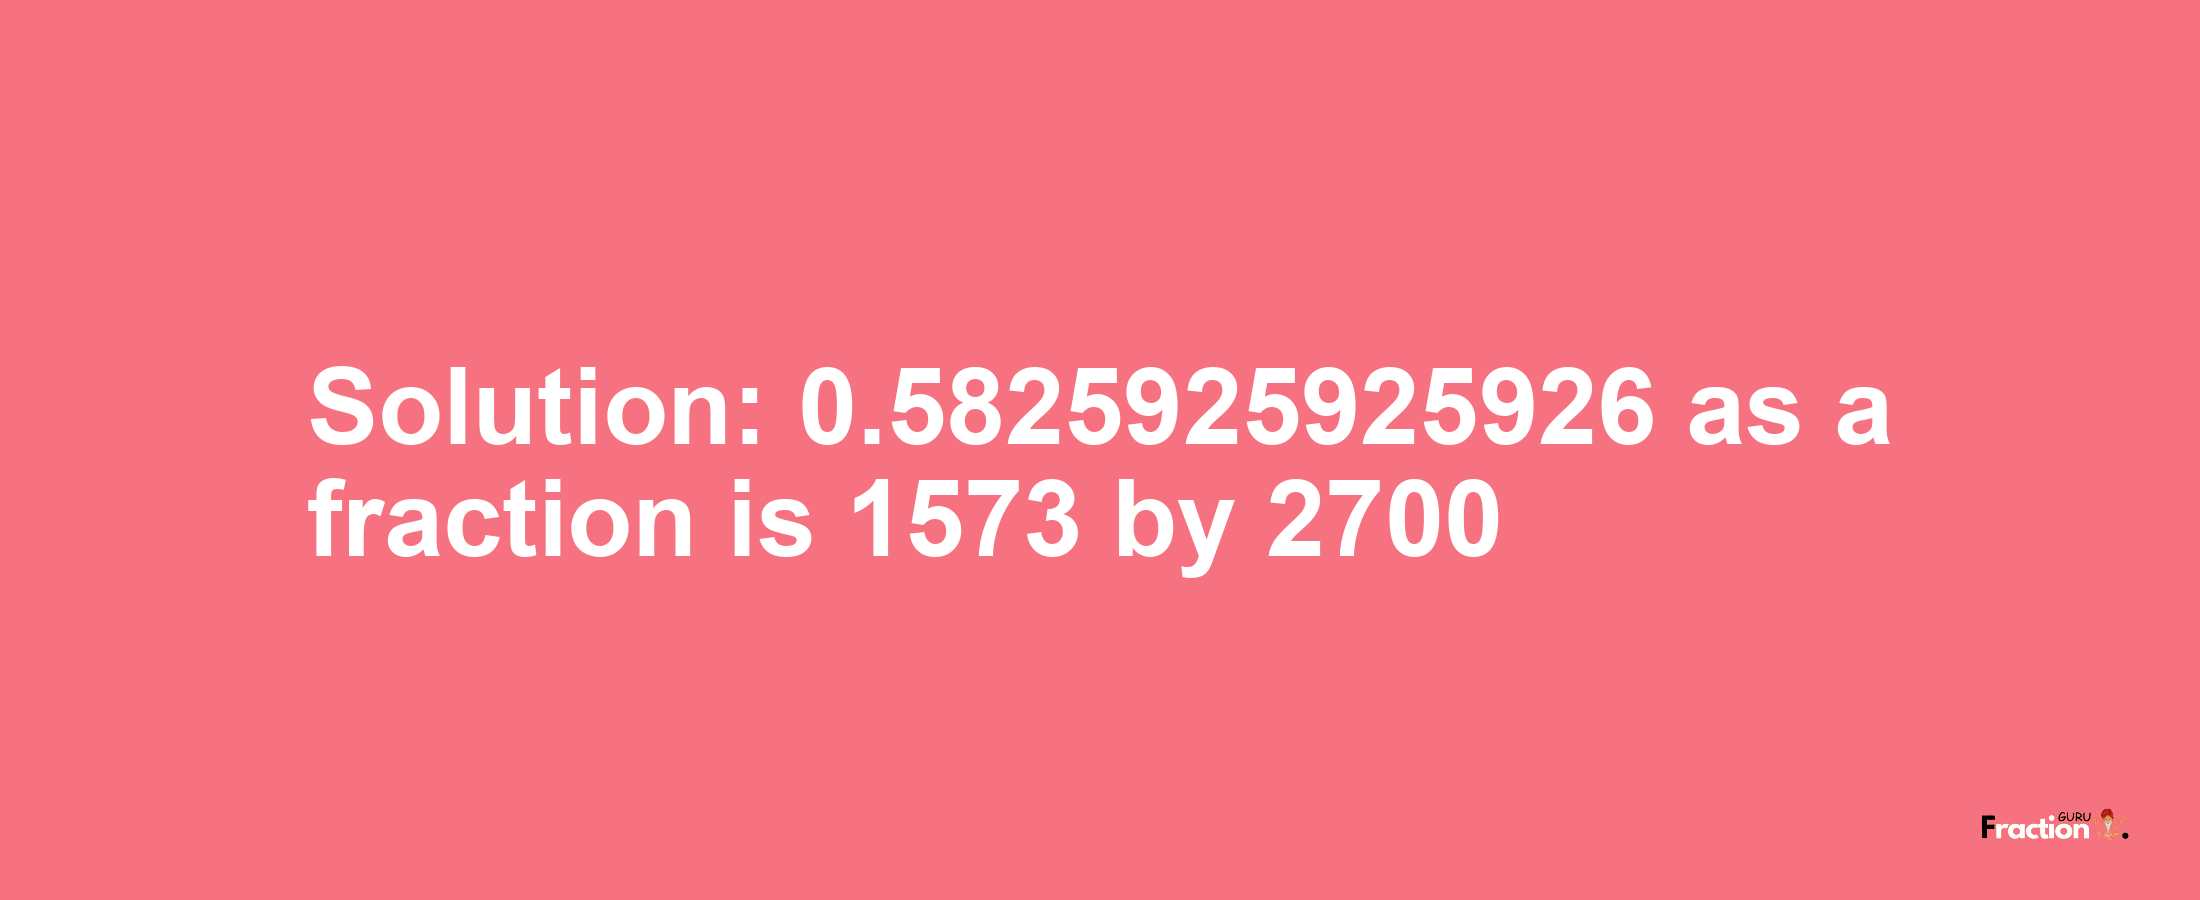 Solution:0.5825925925926 as a fraction is 1573/2700